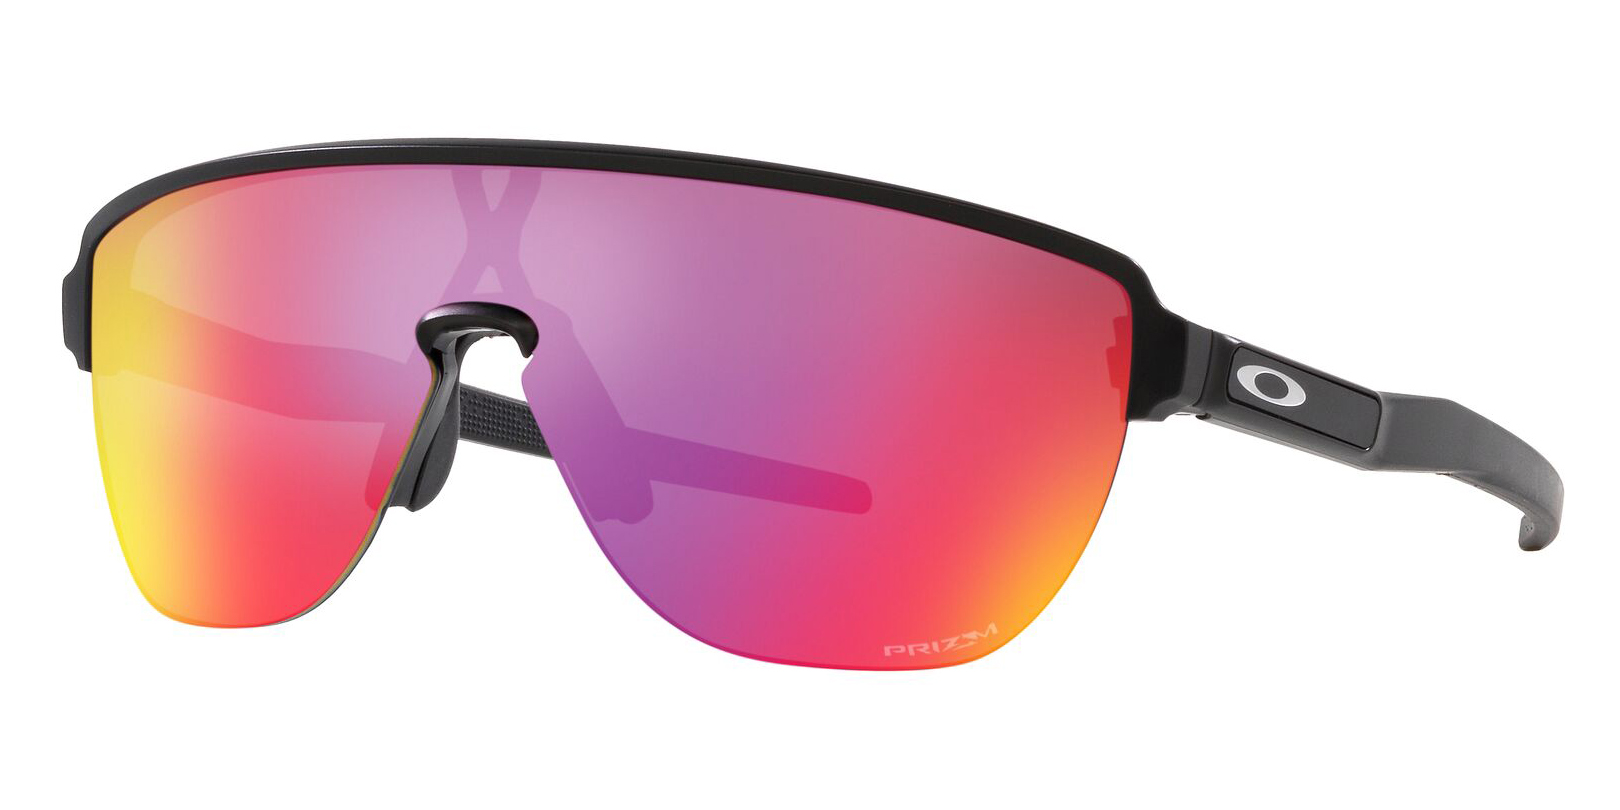 Discover more than 168 oakley casual sunglasses